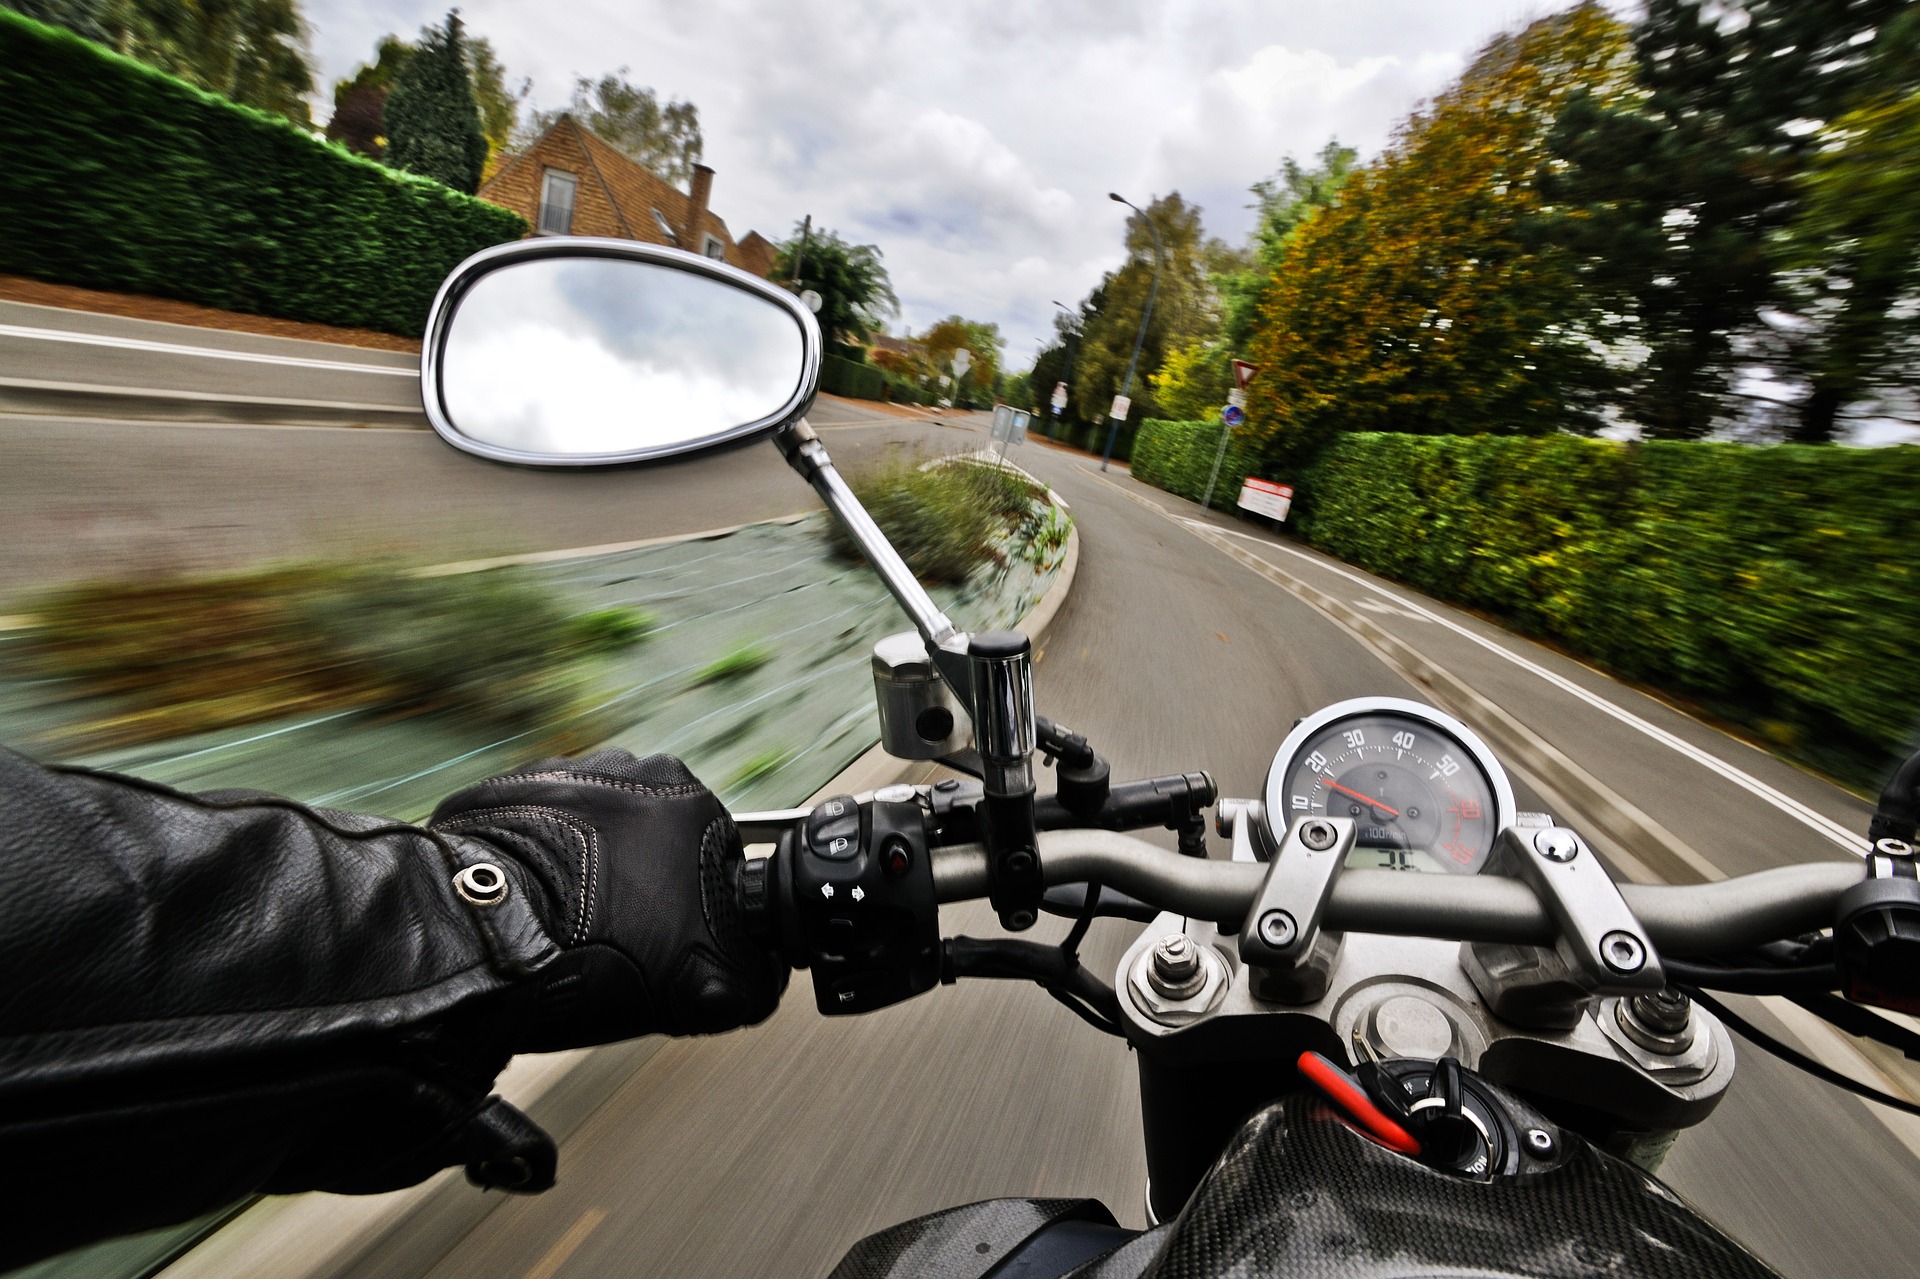 A beginner’s guide to buying a motorcycle